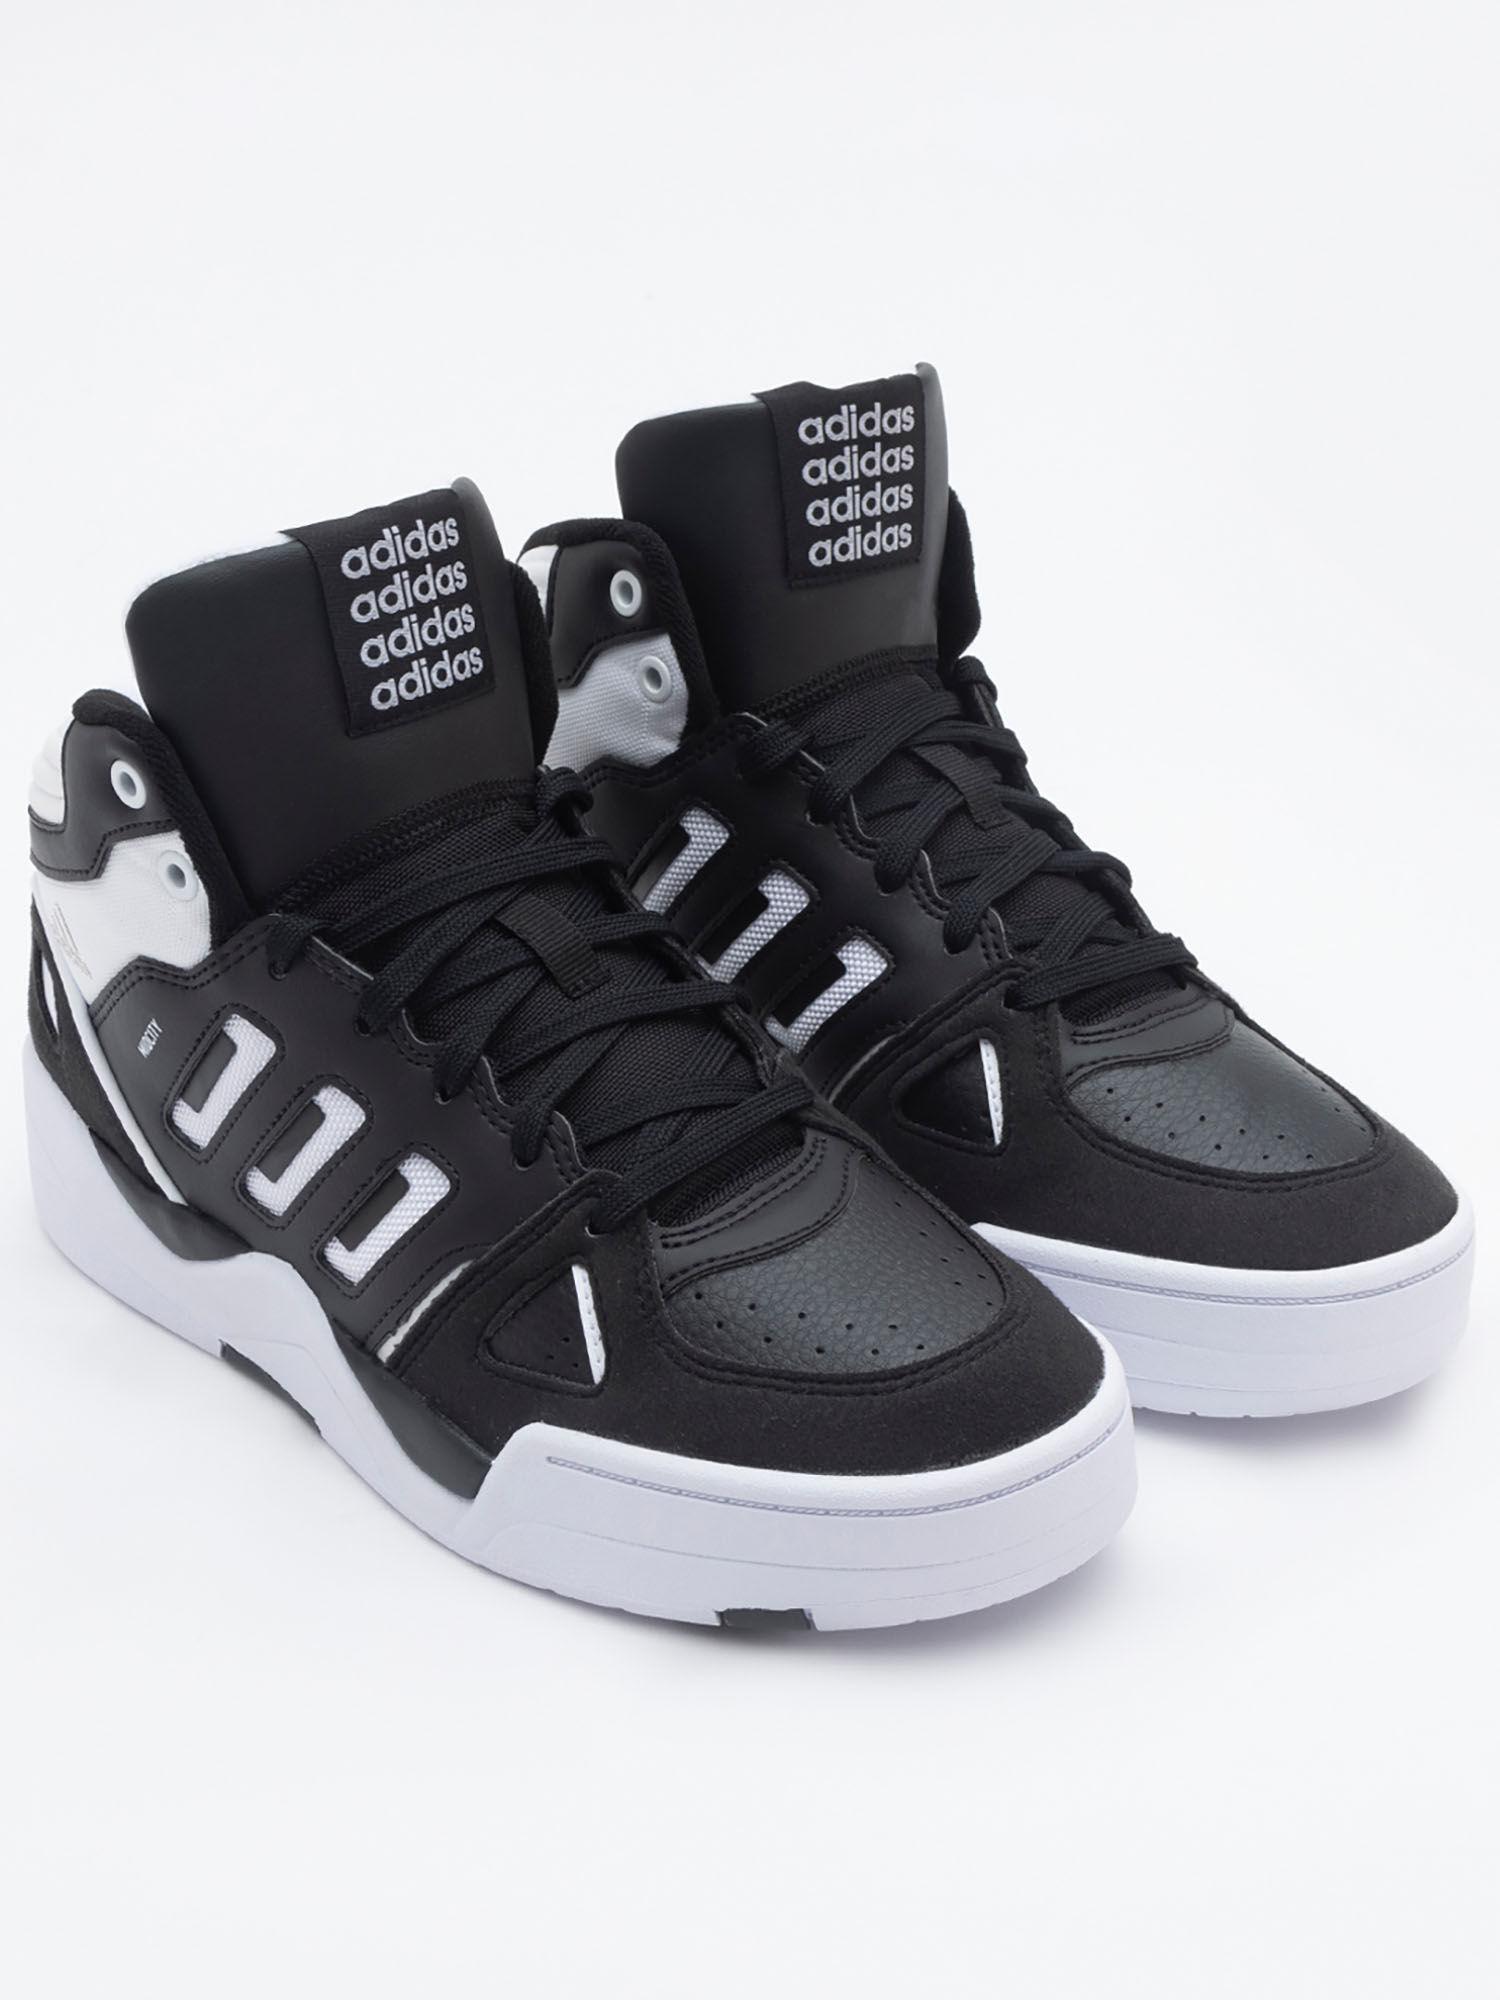 Midcity Mid Basketball Shoes Black